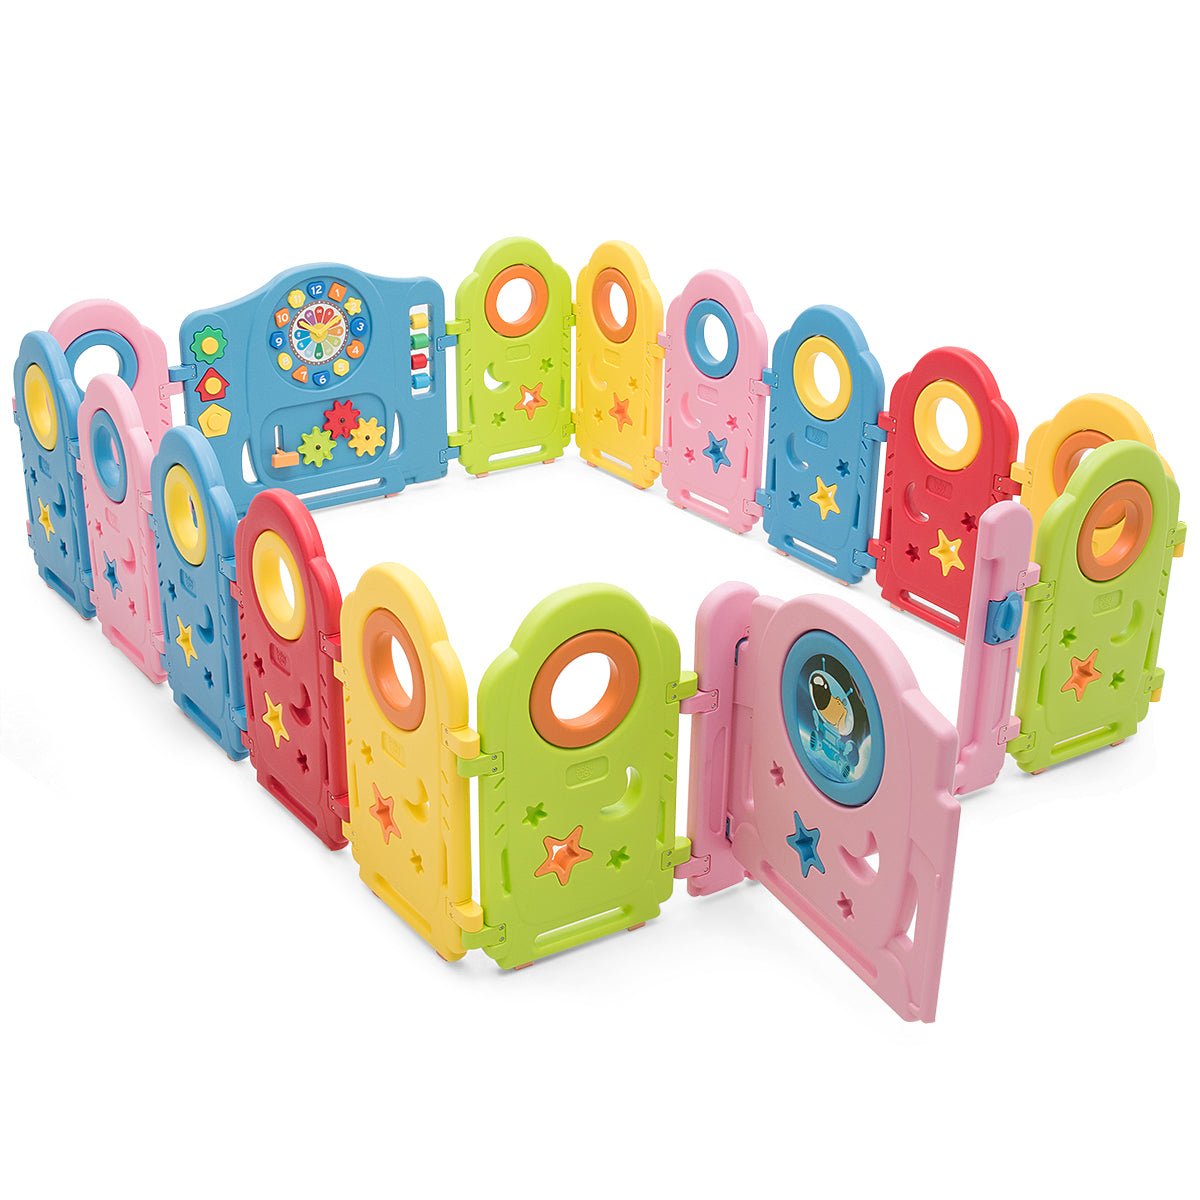 Play Yard with Safety Lock and Engaging Toys for Kids